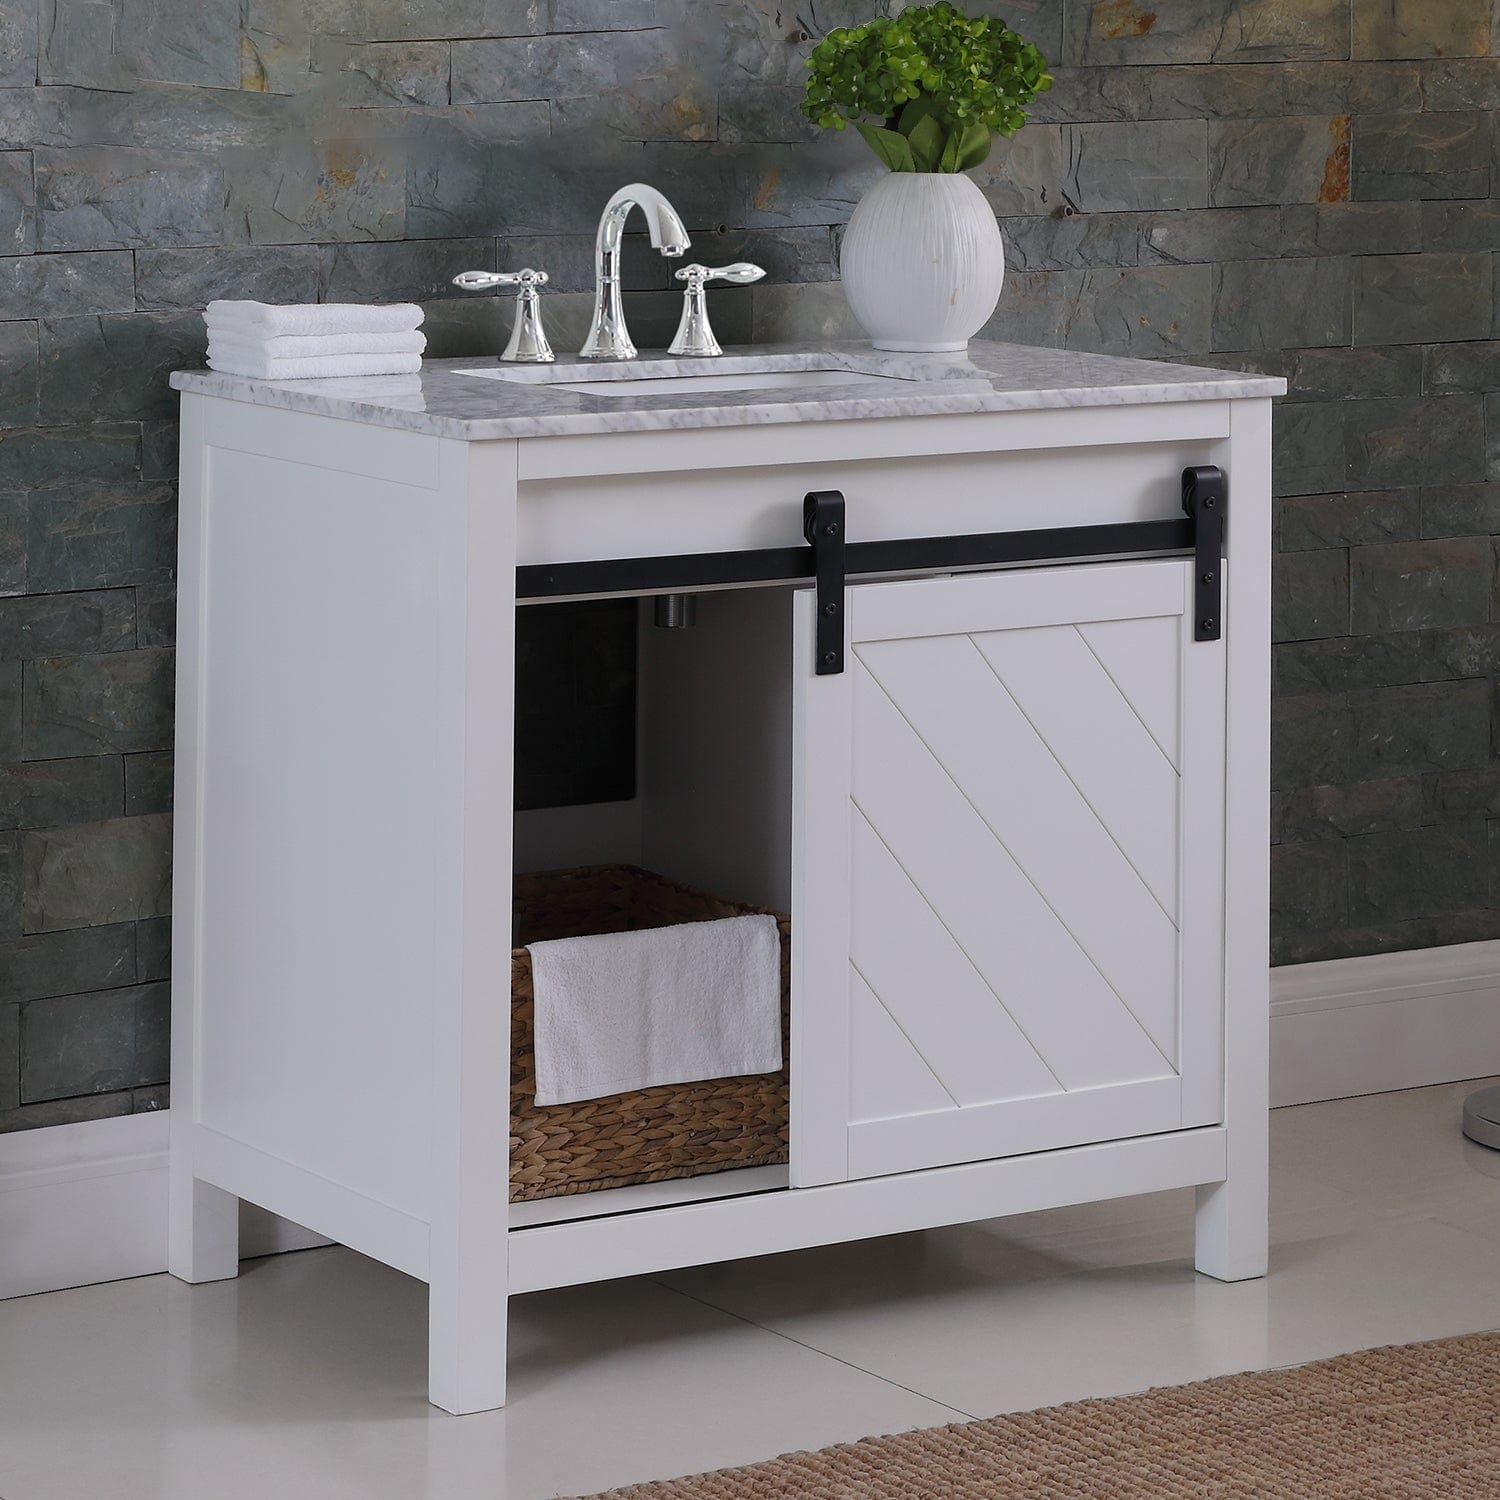 Altair Kinsley 36" Single Bathroom Vanity Set in White and Carrara White Marble Countertop without Mirror 536036-WH-CA-NM - Molaix631112970464Vanity536036-WH-CA-NM